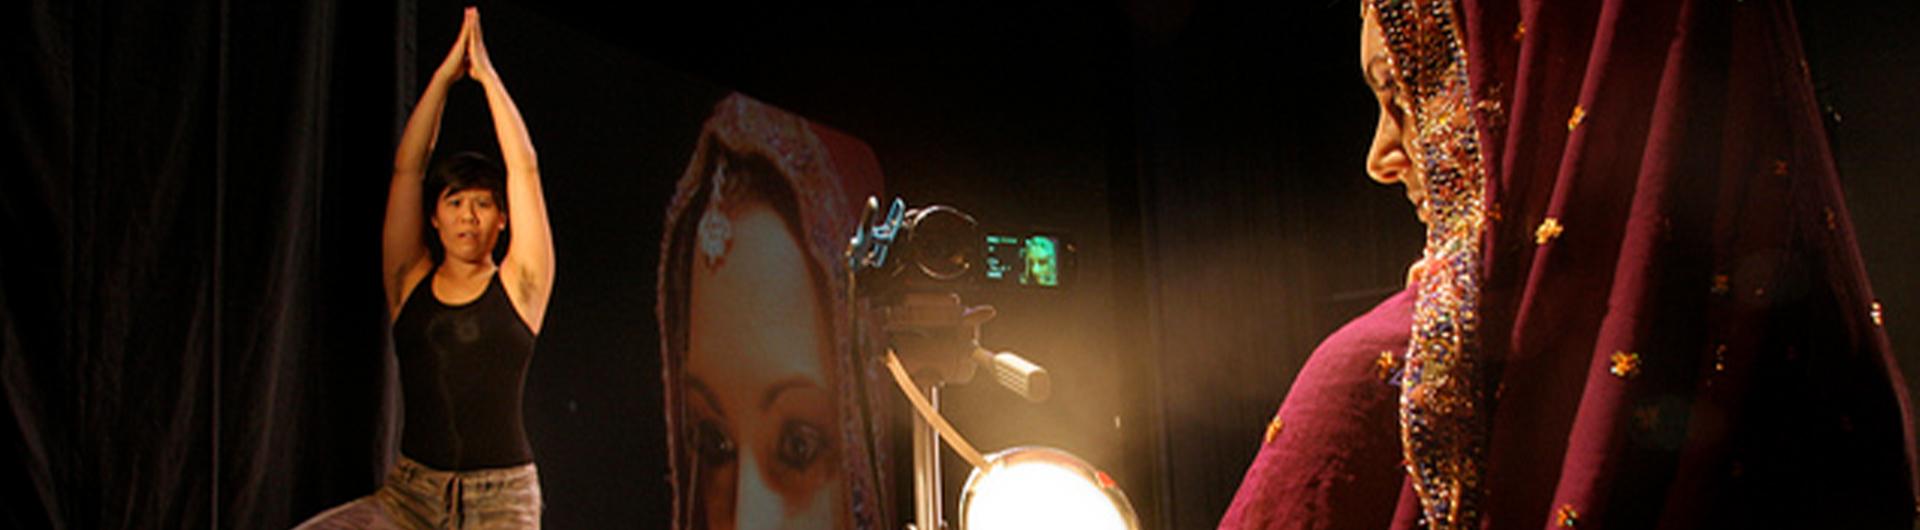 Shyamala Moorty performing on stage with another dancer while she is on camera and projected on a rear screen.